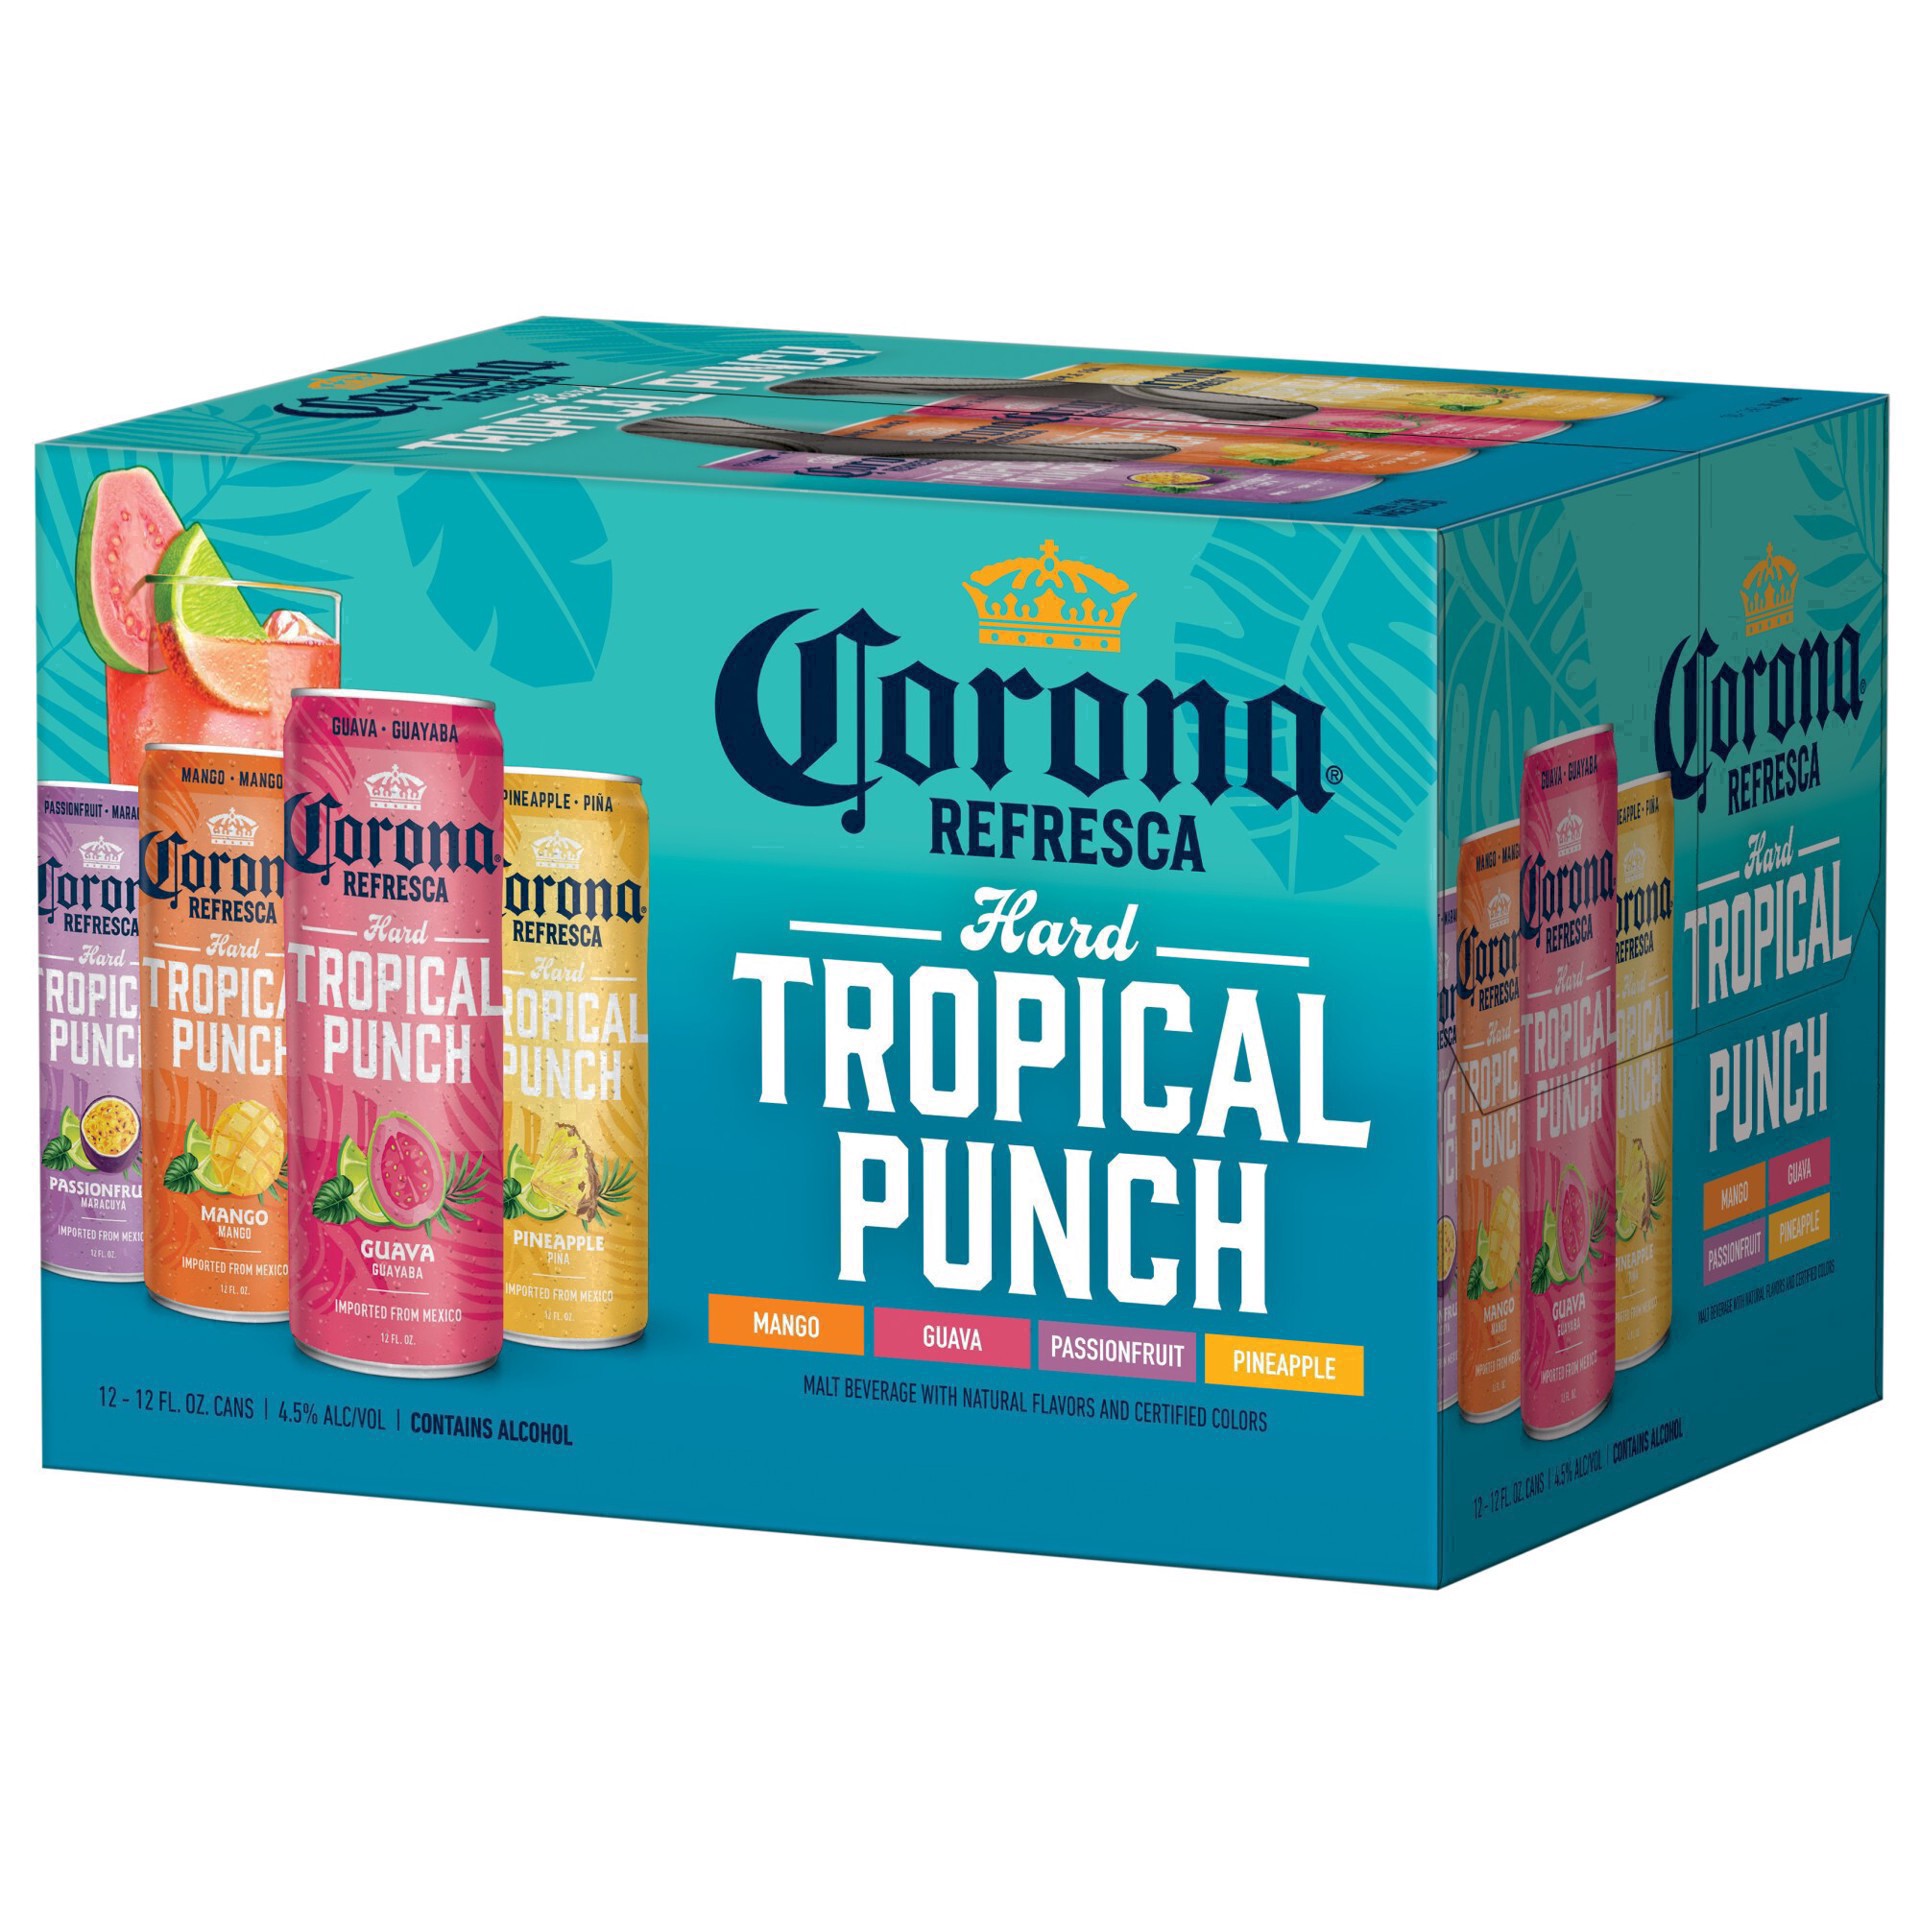 slide 43 of 113, Corona Refresca Hard Tropical Punch Variety Pack Cans, 144 fl oz